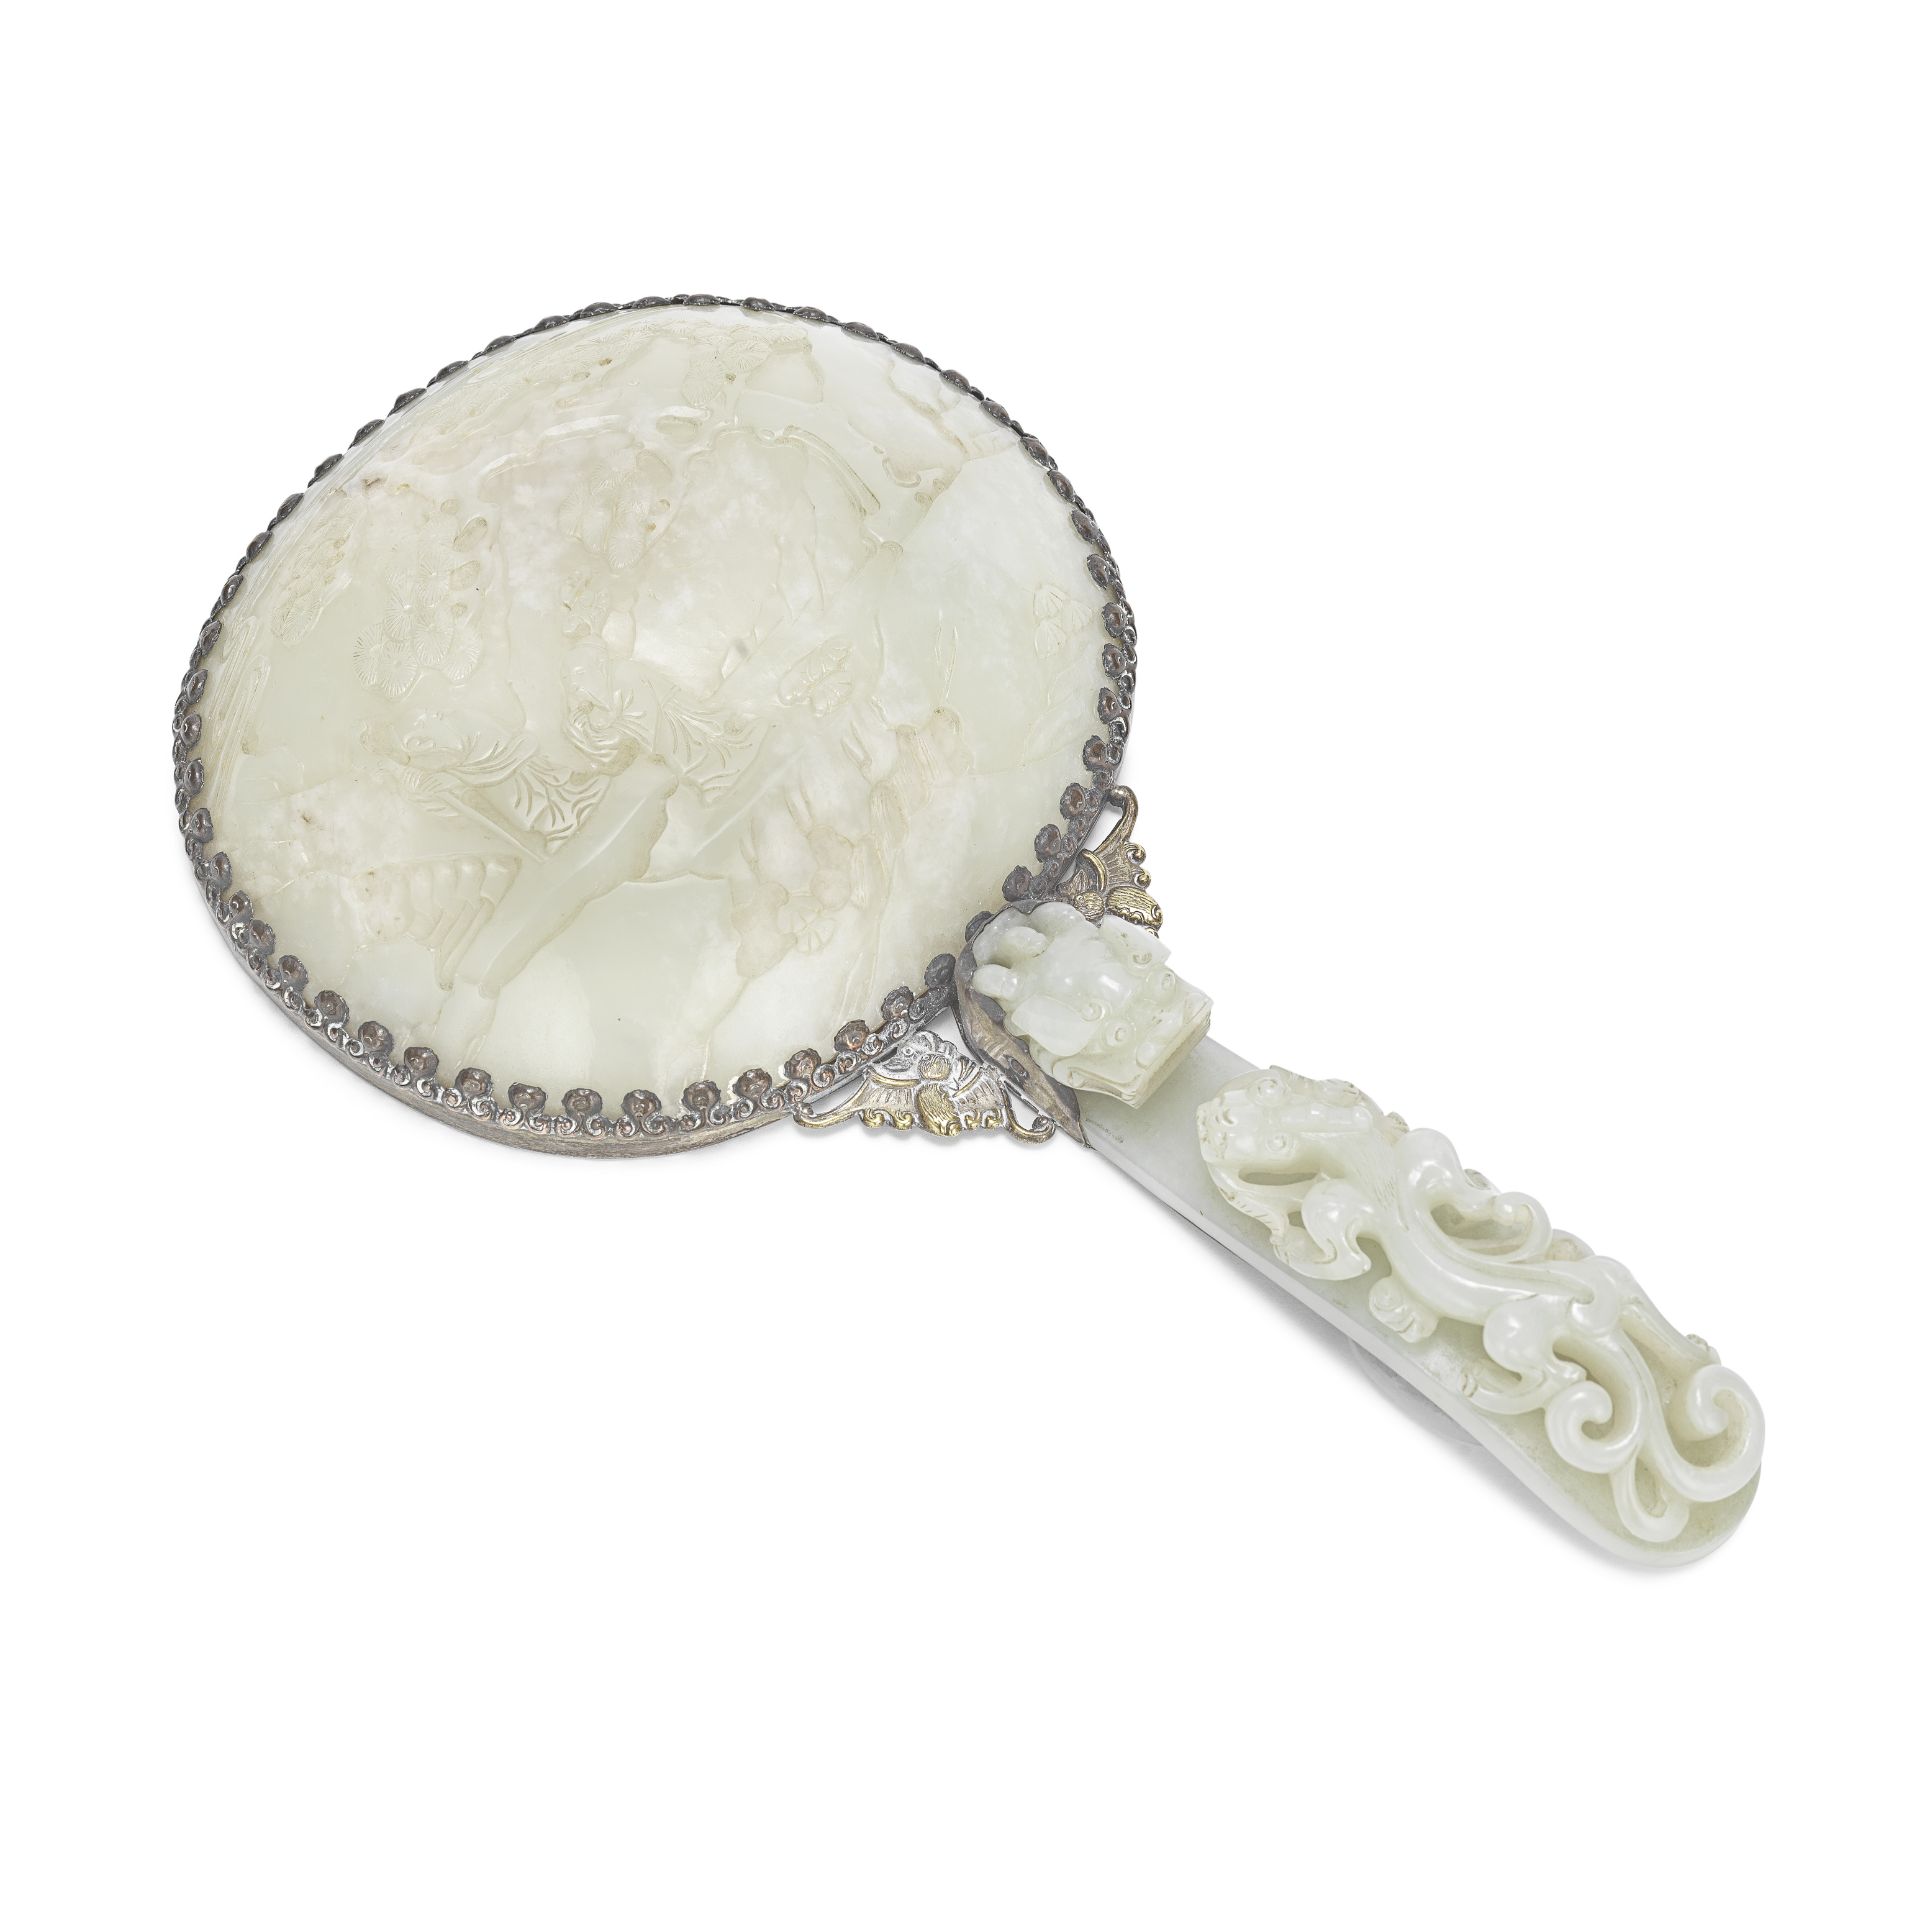 A PALE CELADON JADE BELT HOOK AND OVAL PLAQUE MOUNTED AS A MIRROR 18th/19th century